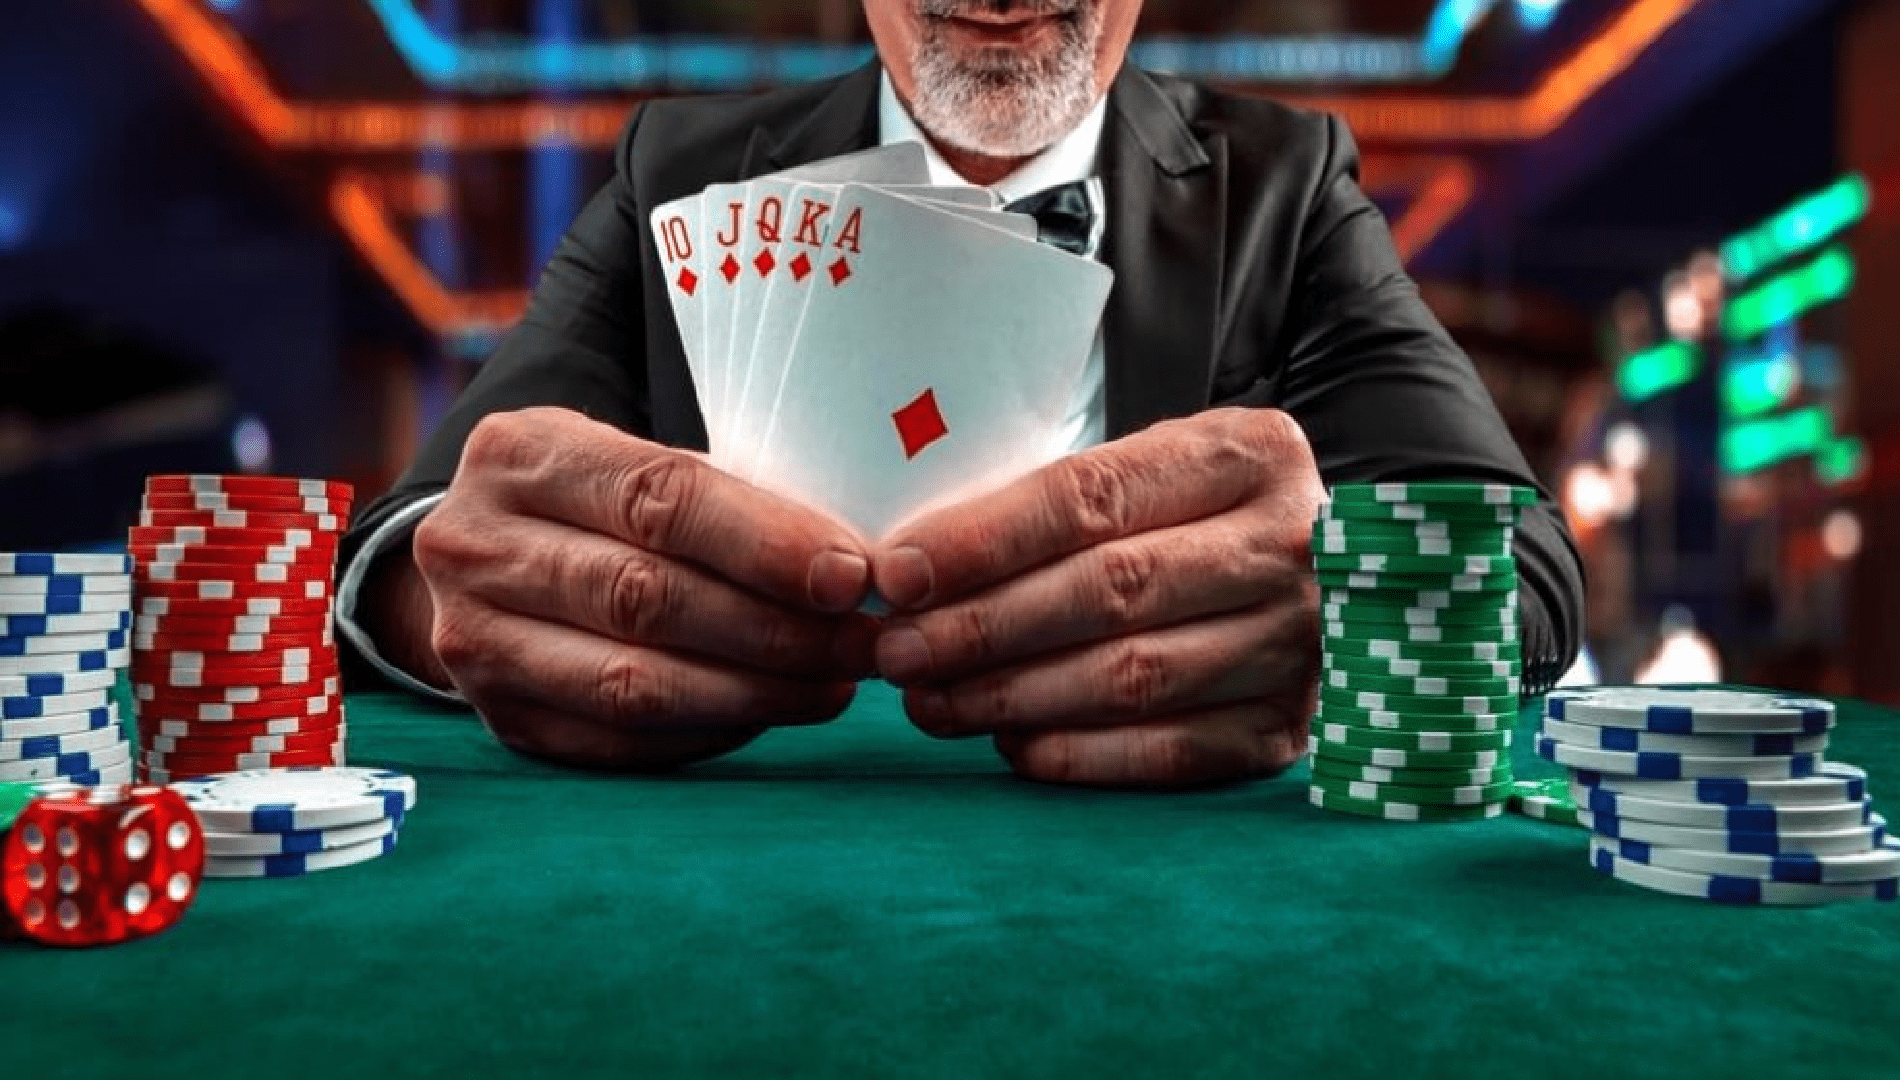 Without realizing it, a poker player hits a royal flush and wins $192,000